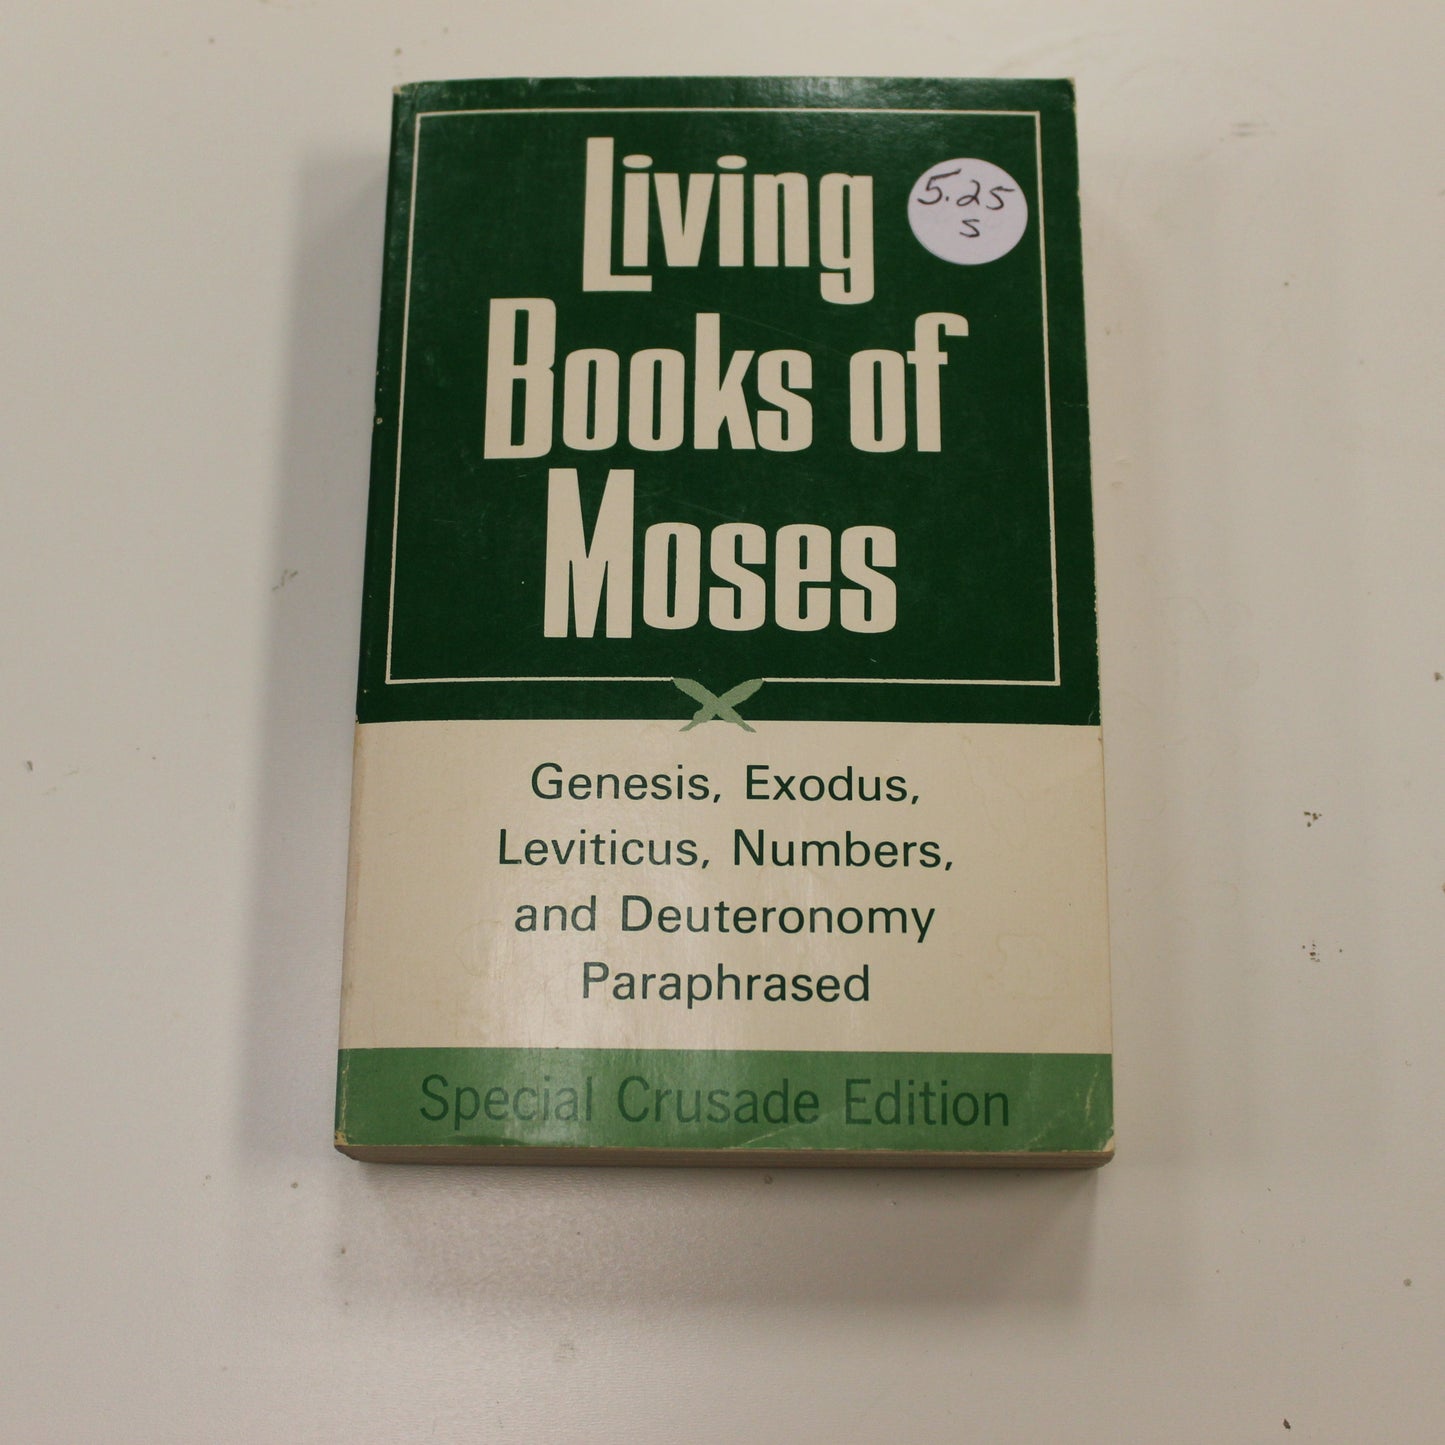 LIVING BOOKS OF MOSES